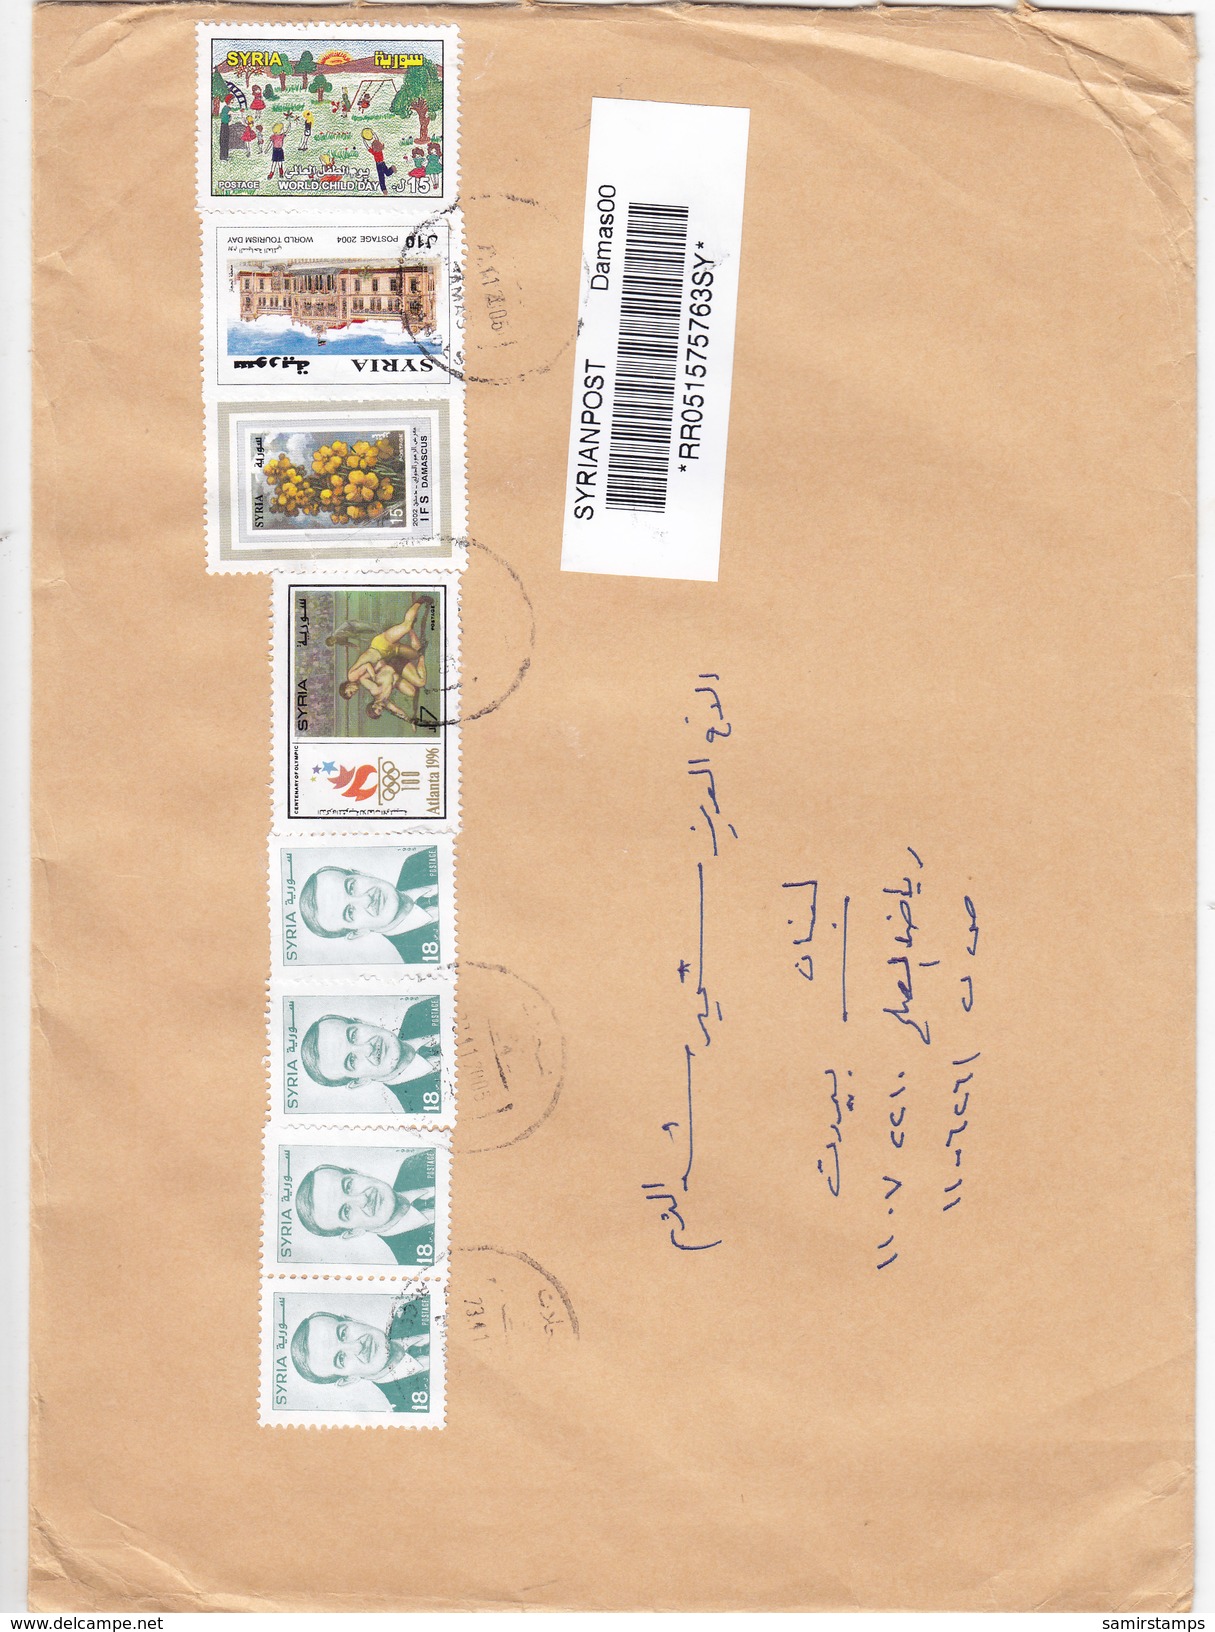 Syria Registr.cover Frabked 4 Com,stamps Large Size Cover-verso Date- 2005-fine, Red. Price-SKRILL PAY. - Syria